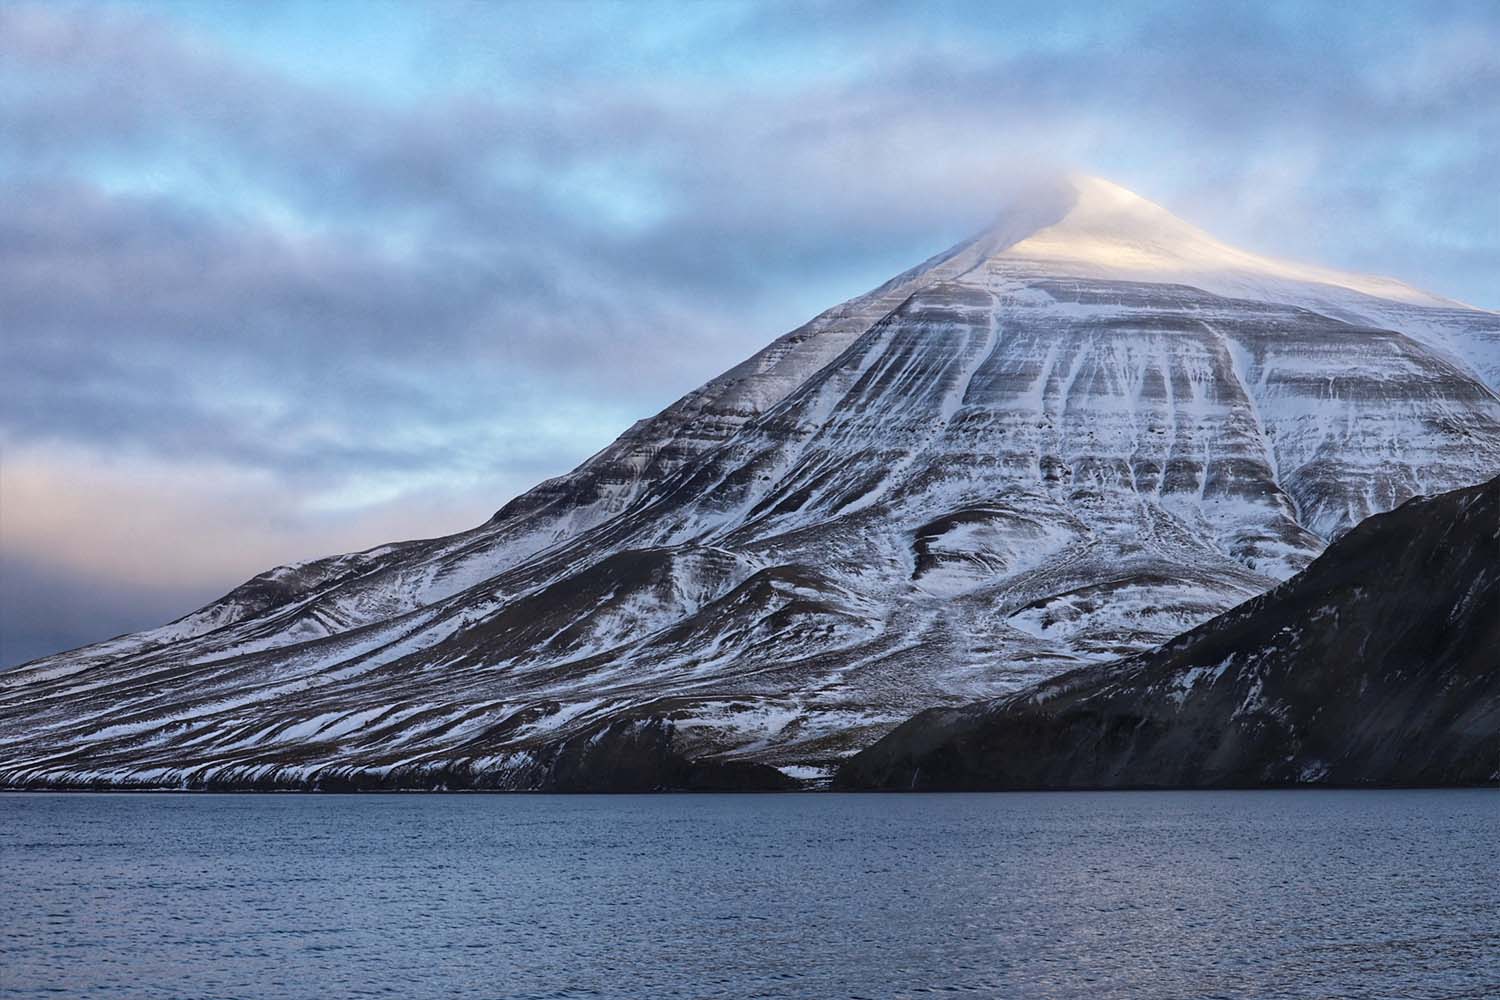 A tour of Svalbard